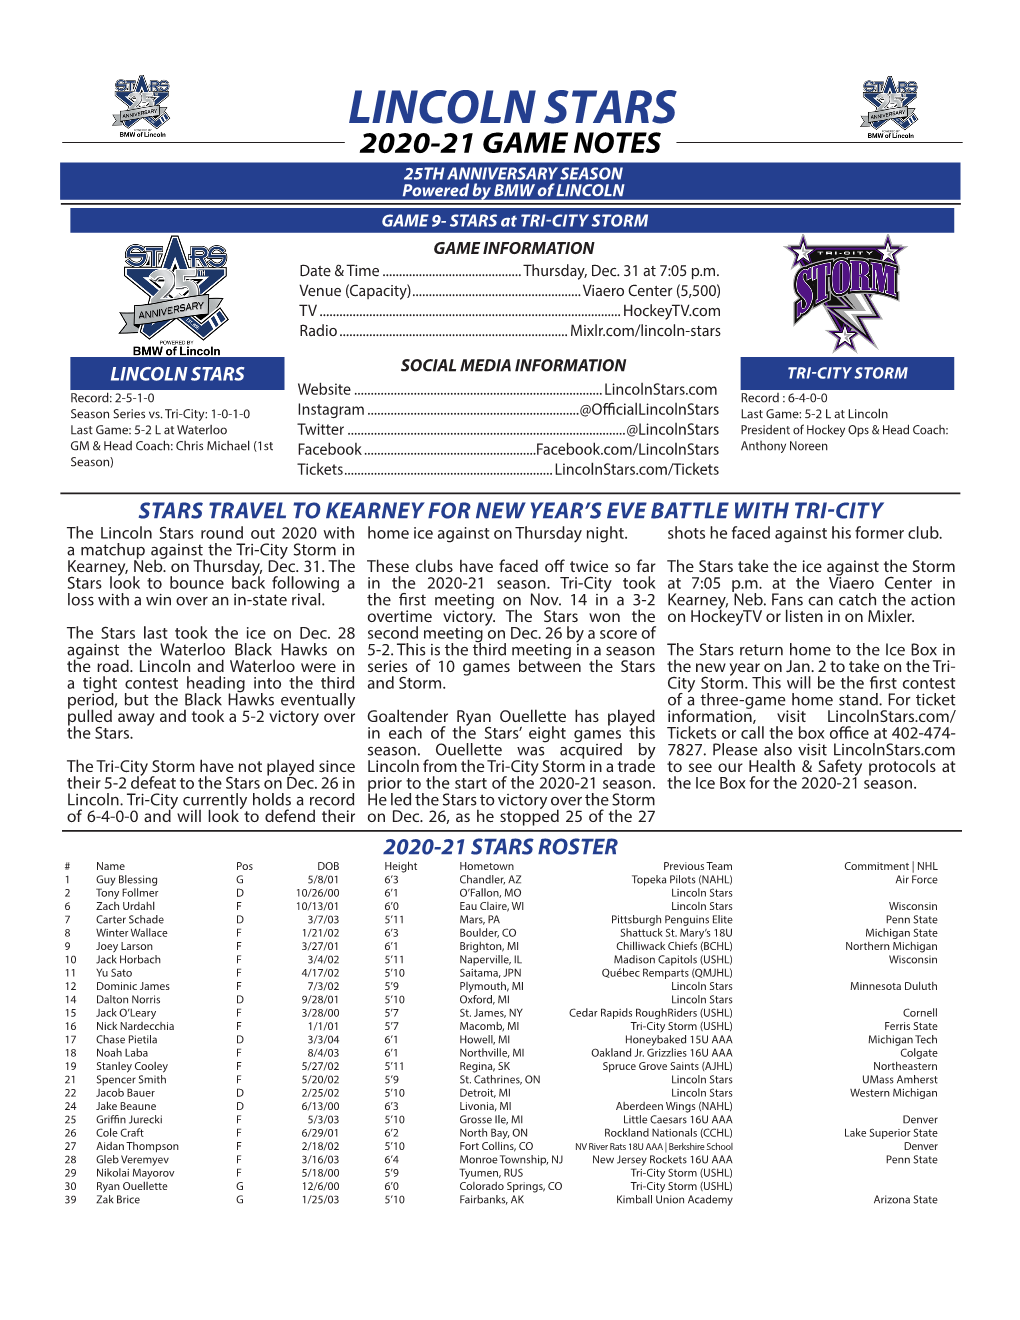 LINCOLN STARS 2020-21 GAME NOTES 25TH ANNIVERSARY SEASON Powered by BMW of LINCOLN GAME 9- STARS at TRI-CITY STORM GAME INFORMATION Date & Time